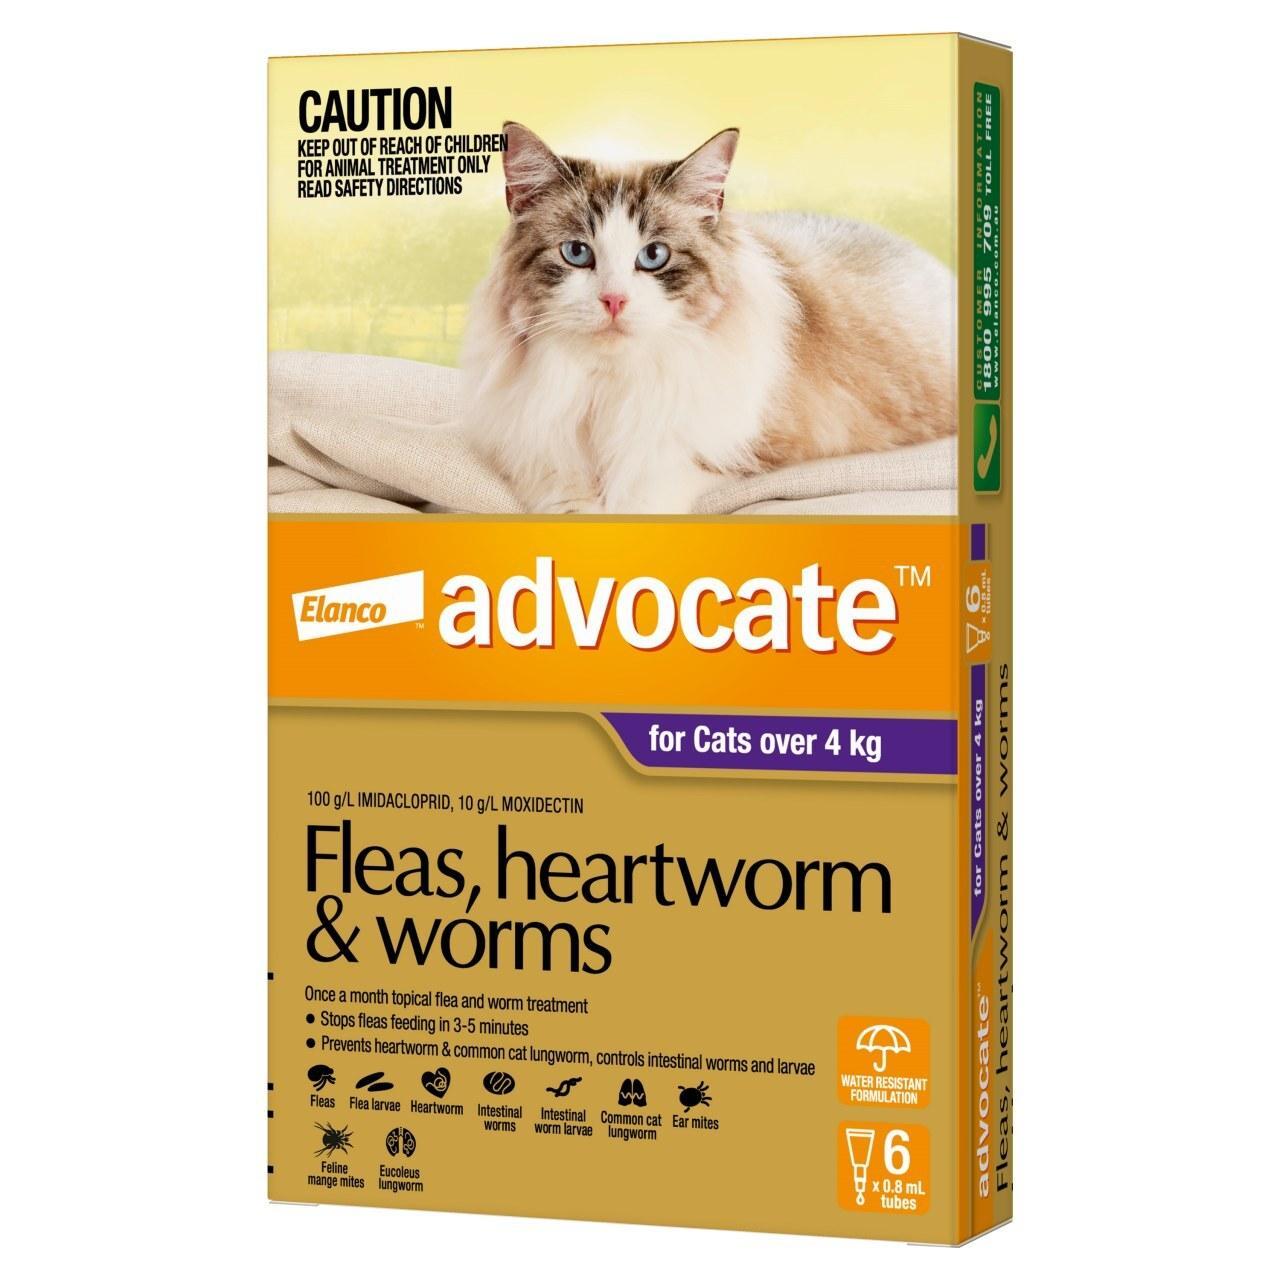 Advocate Spot-On Flea & Worm Control for Cats over 4kg - 6 Pack